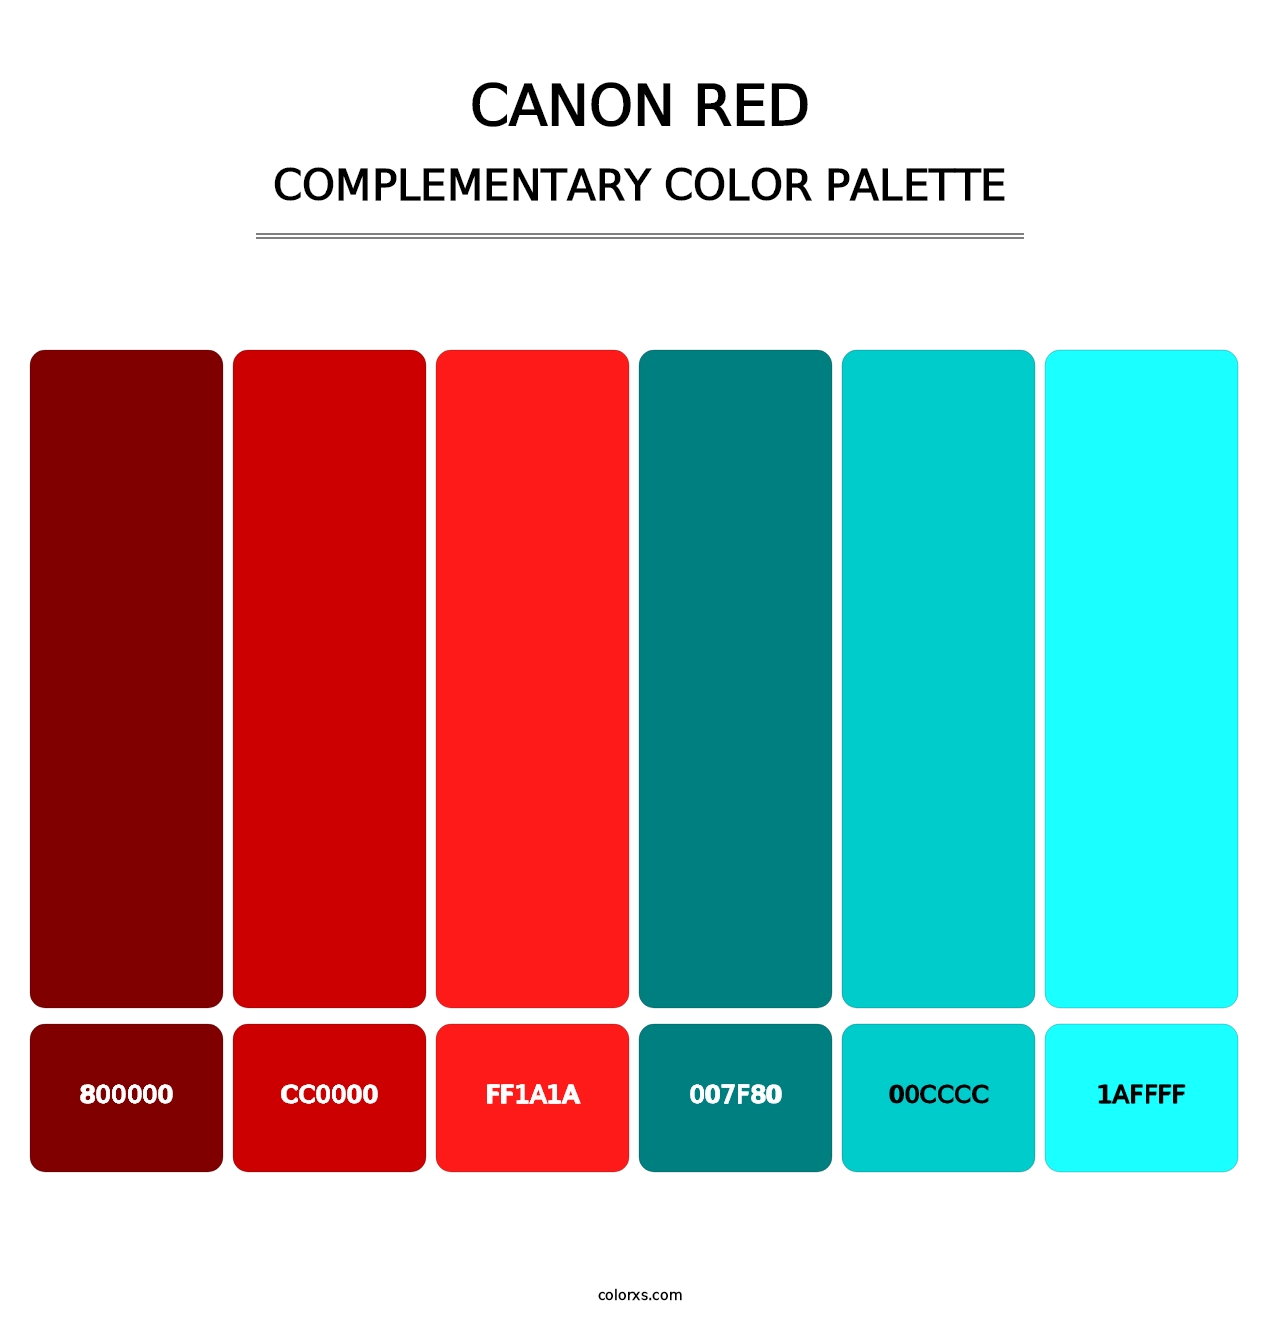 Canon Red - Complementary Color Palette